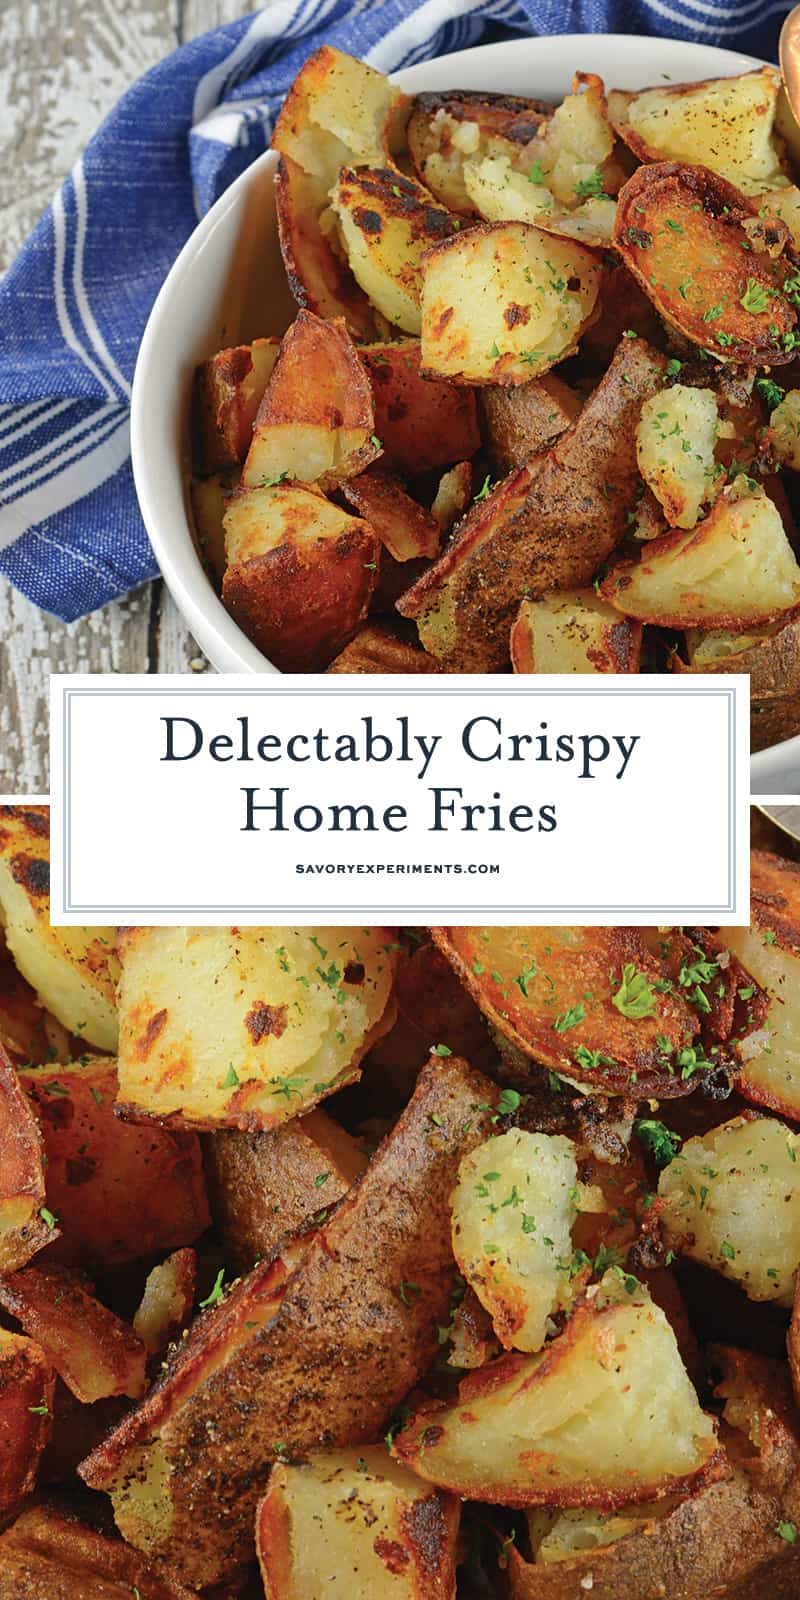 Make Crispy Home Fries like at the restaurant right at home! My recipe is super crispy, and has a secret ingredient that makes them the best potatoes ever! #breakfastpotatoes #howtomakehomefries #potatorecipes www.savoryexperiments.com